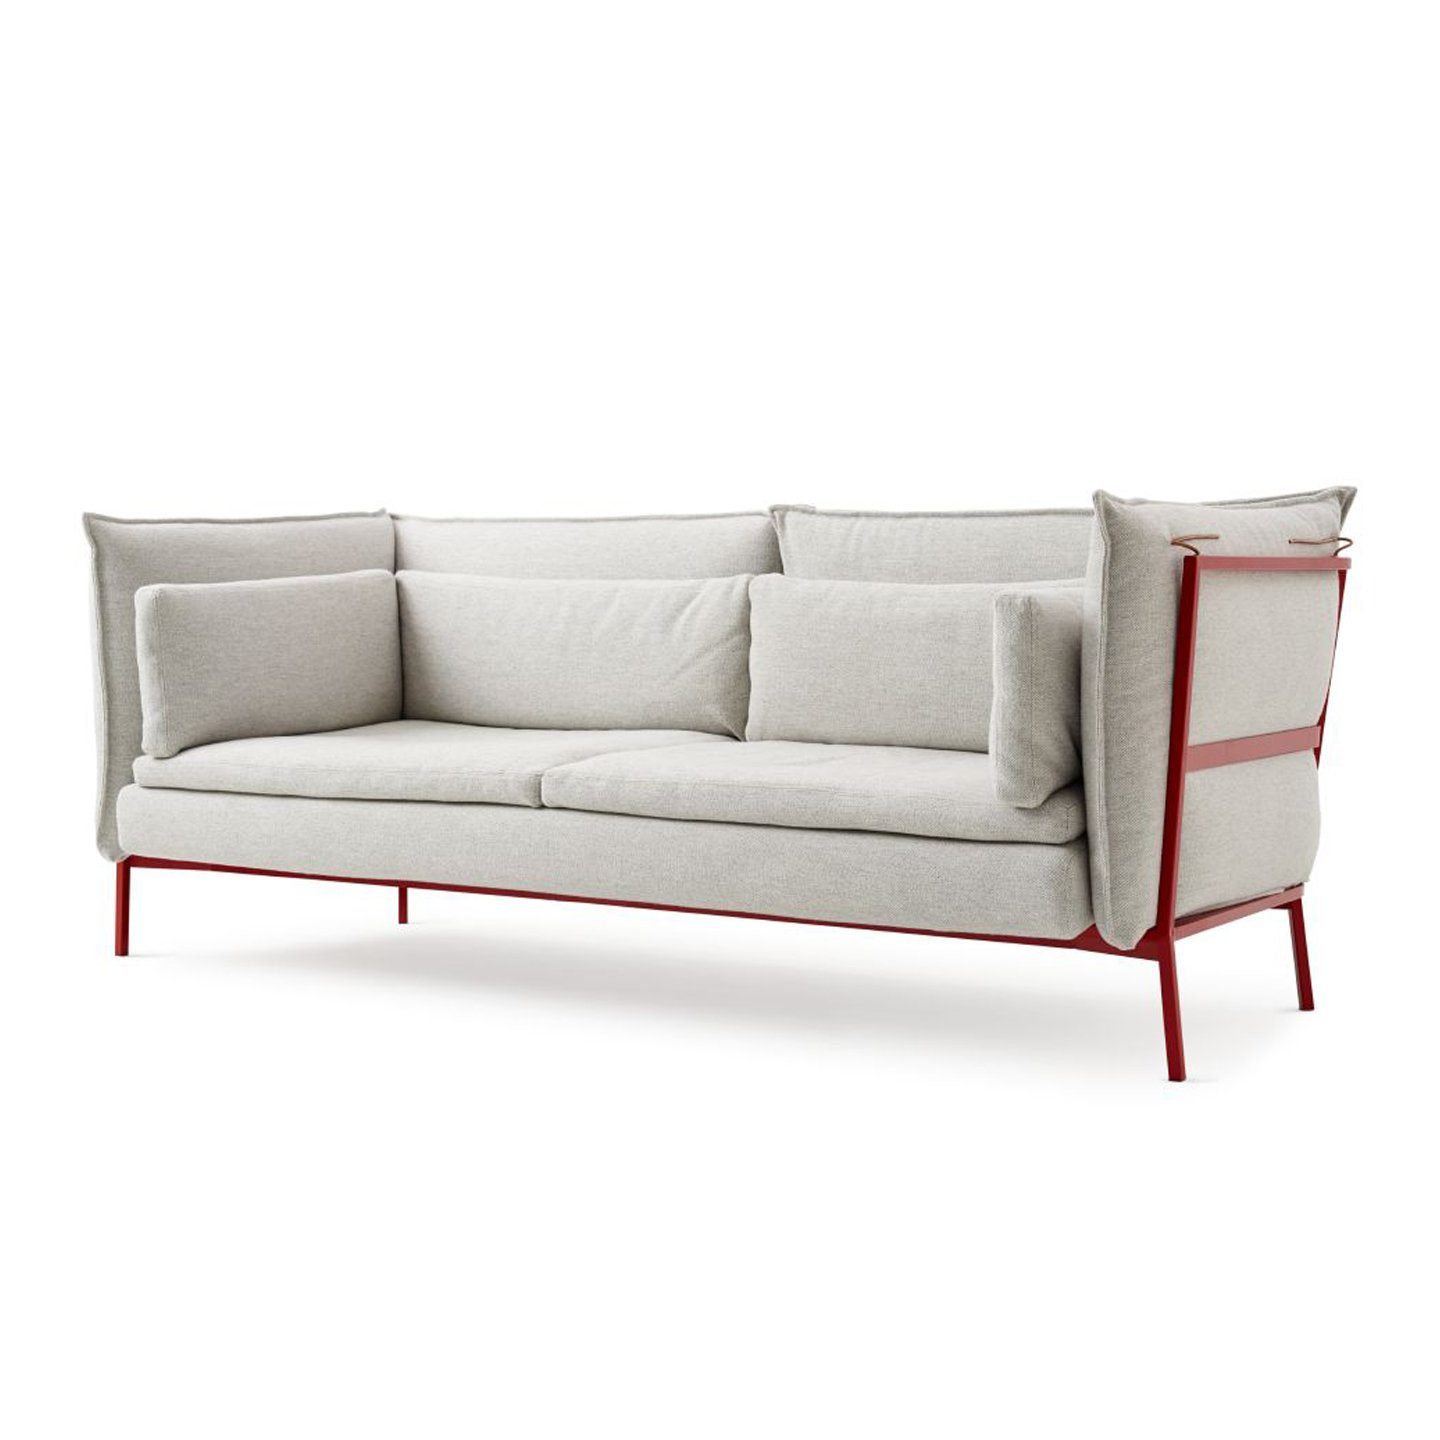 Haworth Basket 011 sofa in grey and red color